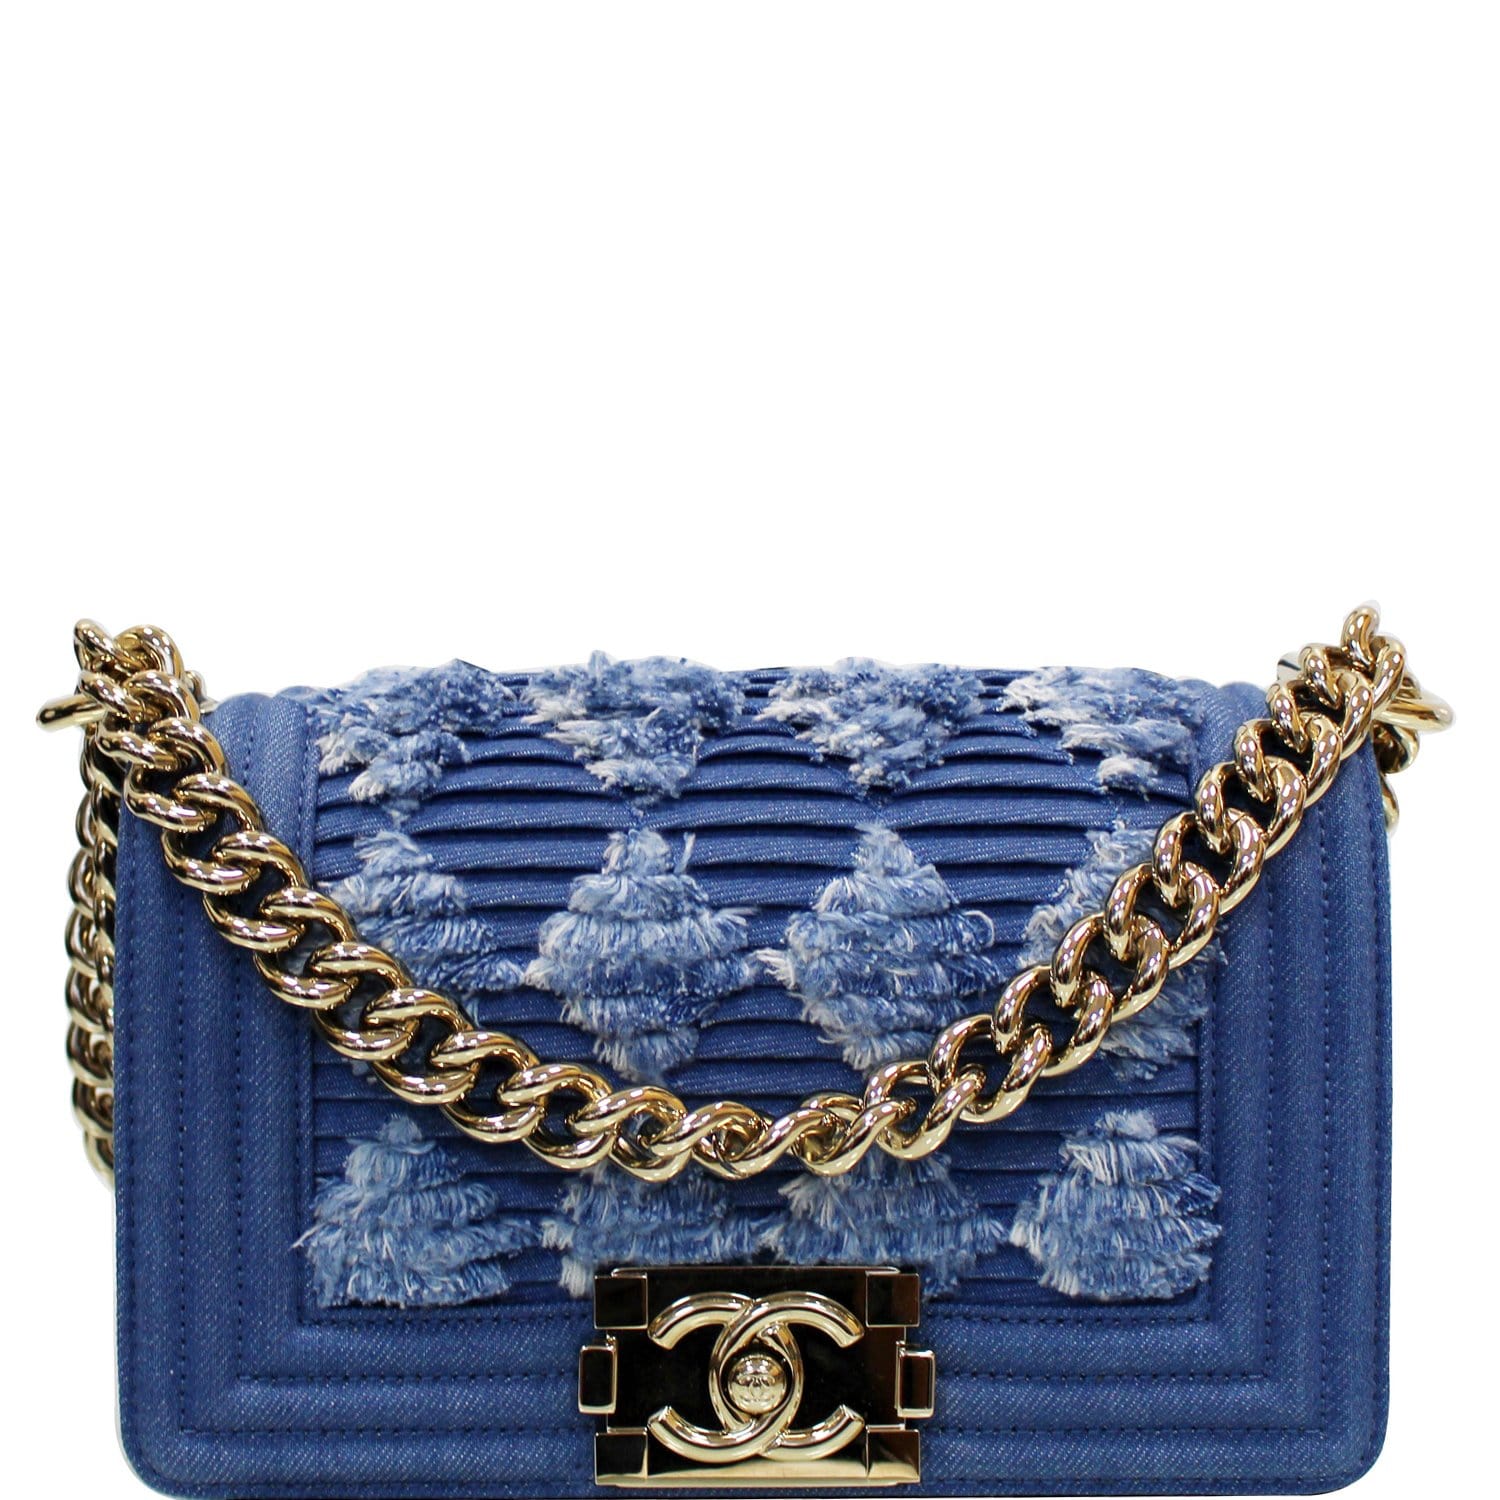 Sold at Auction: Chanel Quilted Denim Mini Classic Square Flap Bag